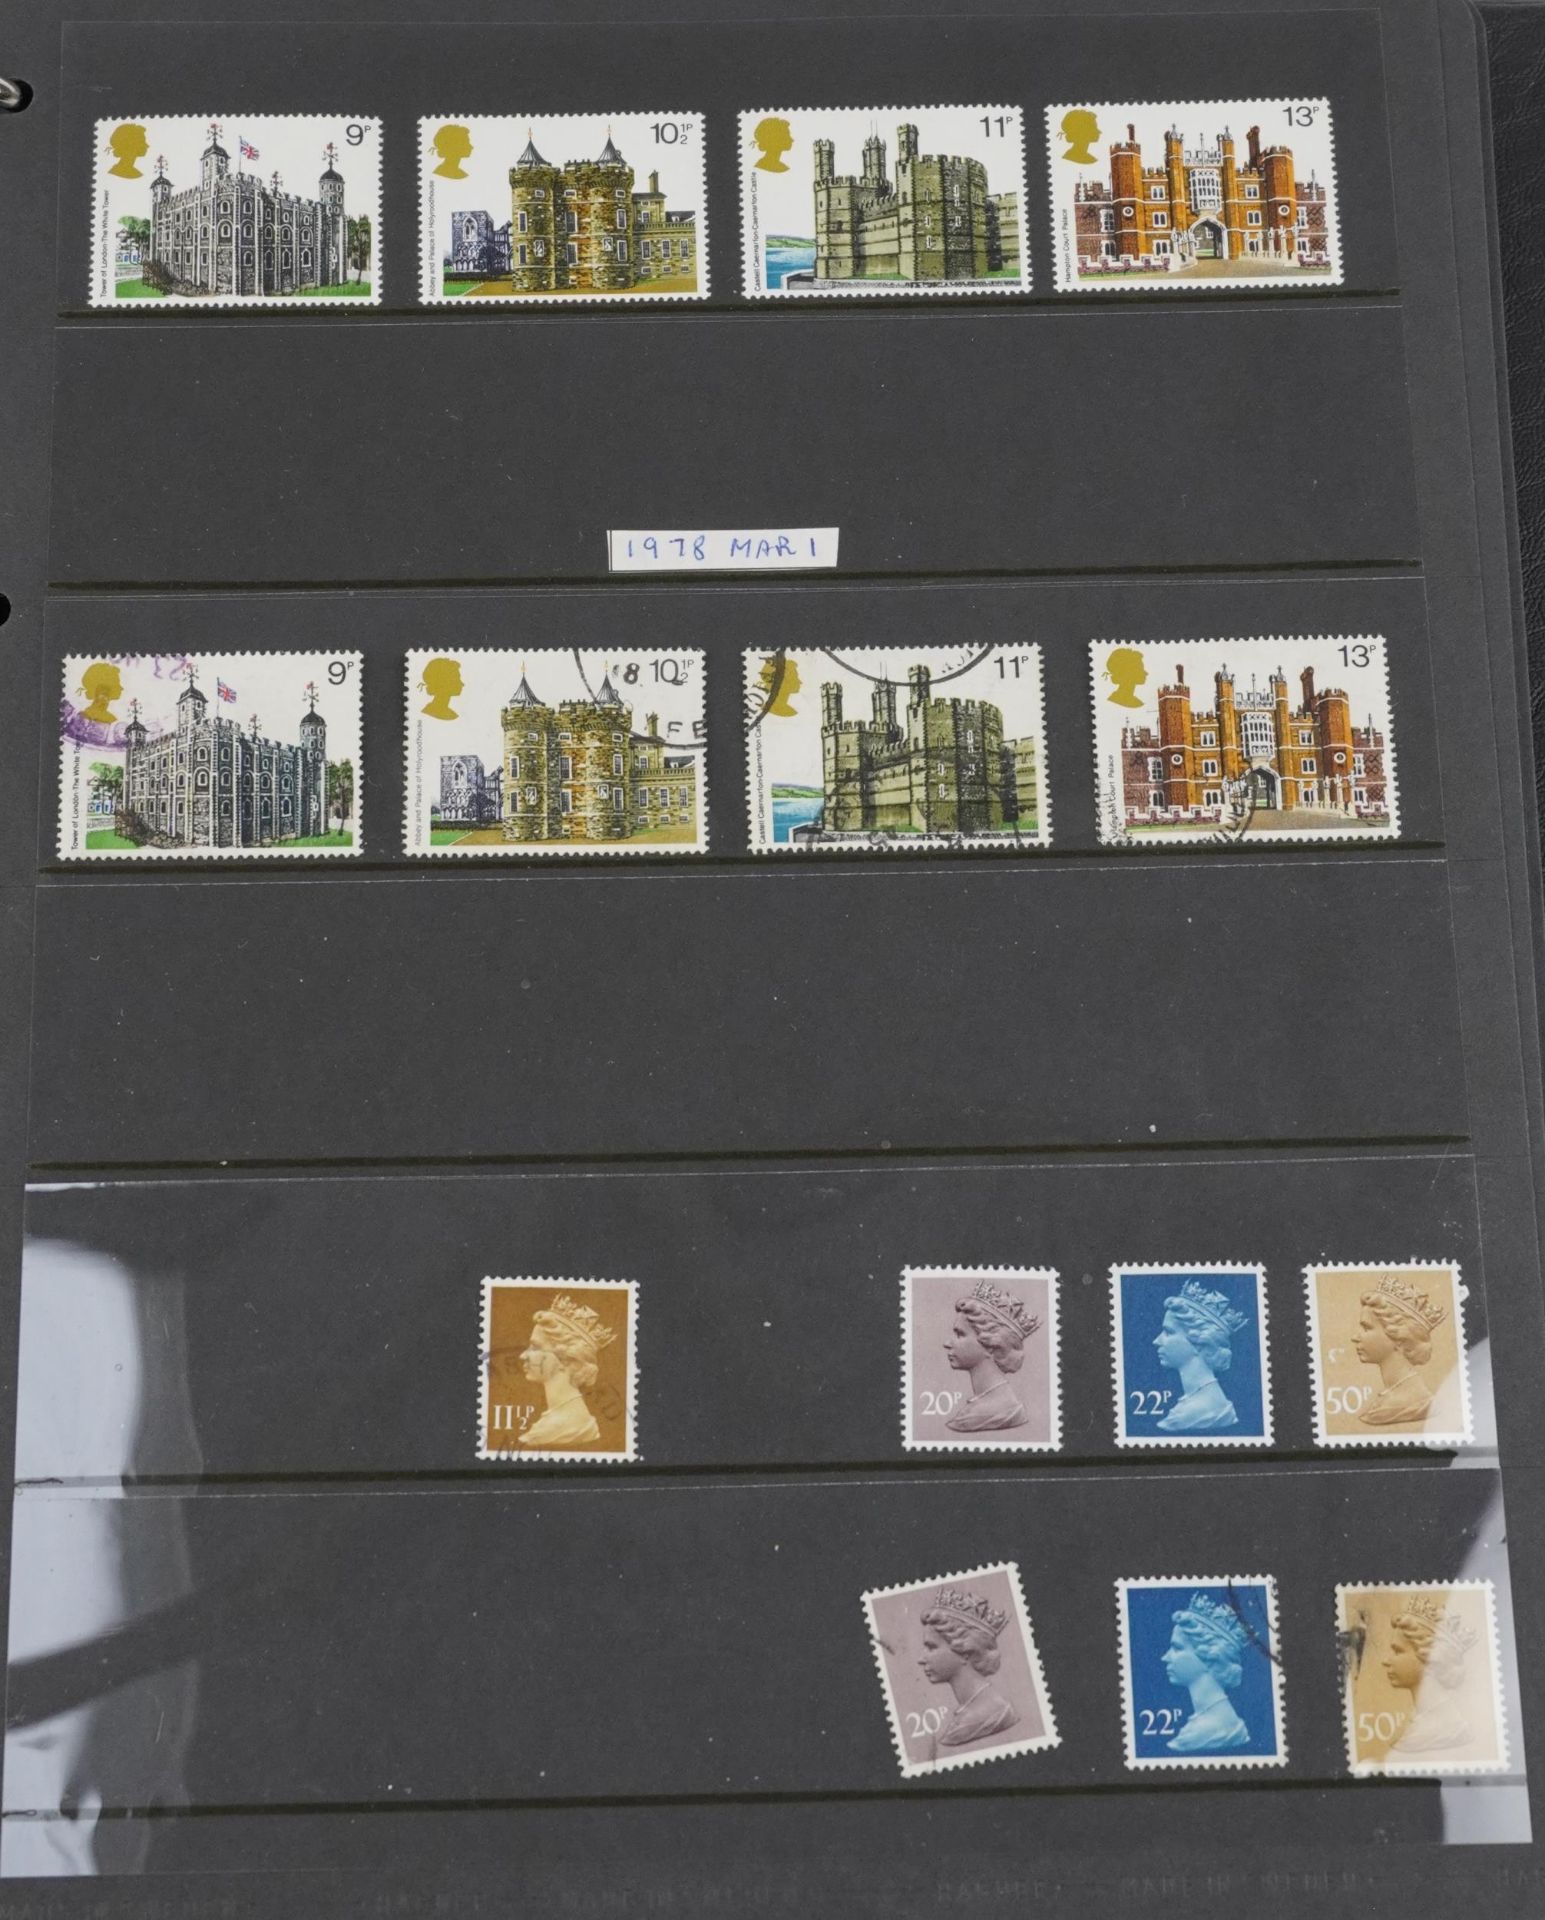 Collection of British mint and used stamps arranged in five albums or stock books including booklets